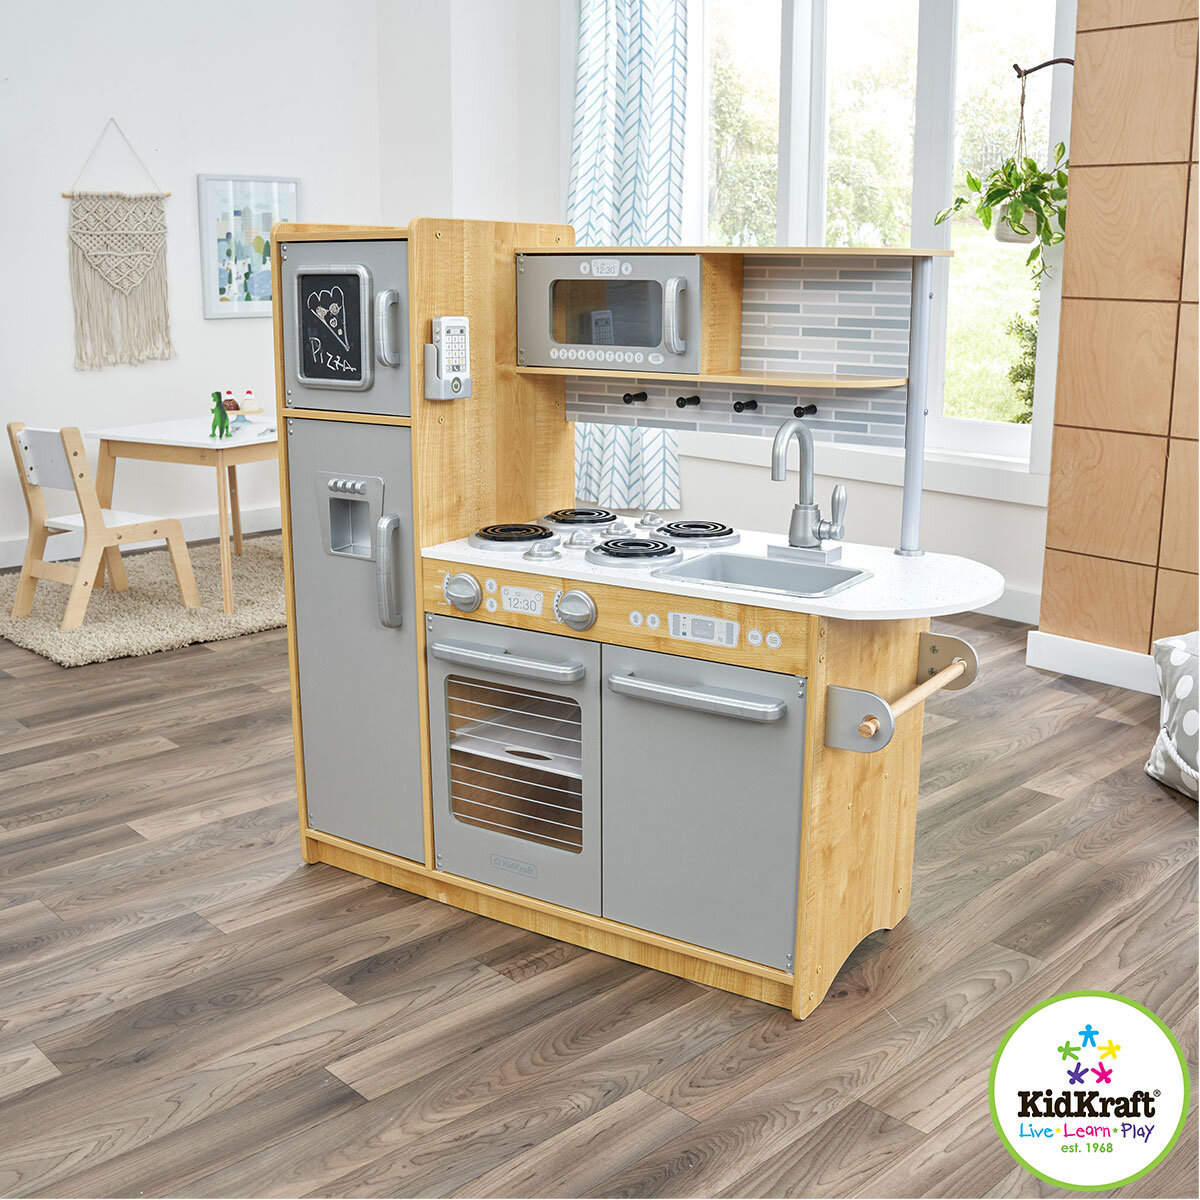 Buy KidKraft Uptown Natural Kitchen Overview Image at Costco.co.uk